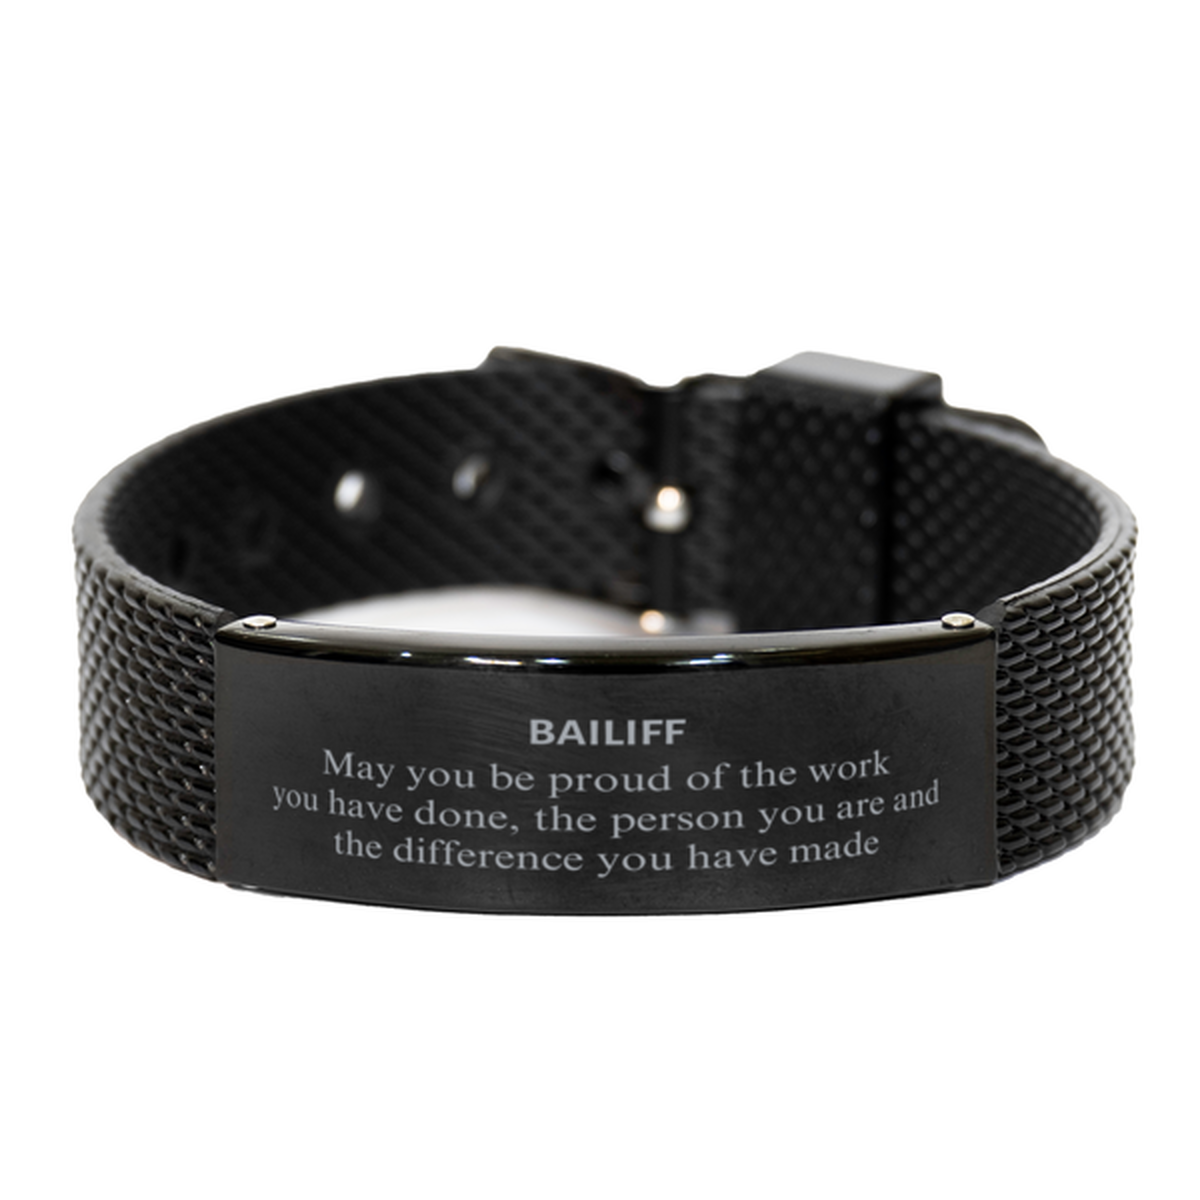 Bailiff May you be proud of the work you have done, Retirement Bailiff Black Shark Mesh Bracelet for Colleague Appreciation Gifts Amazing for Bailiff